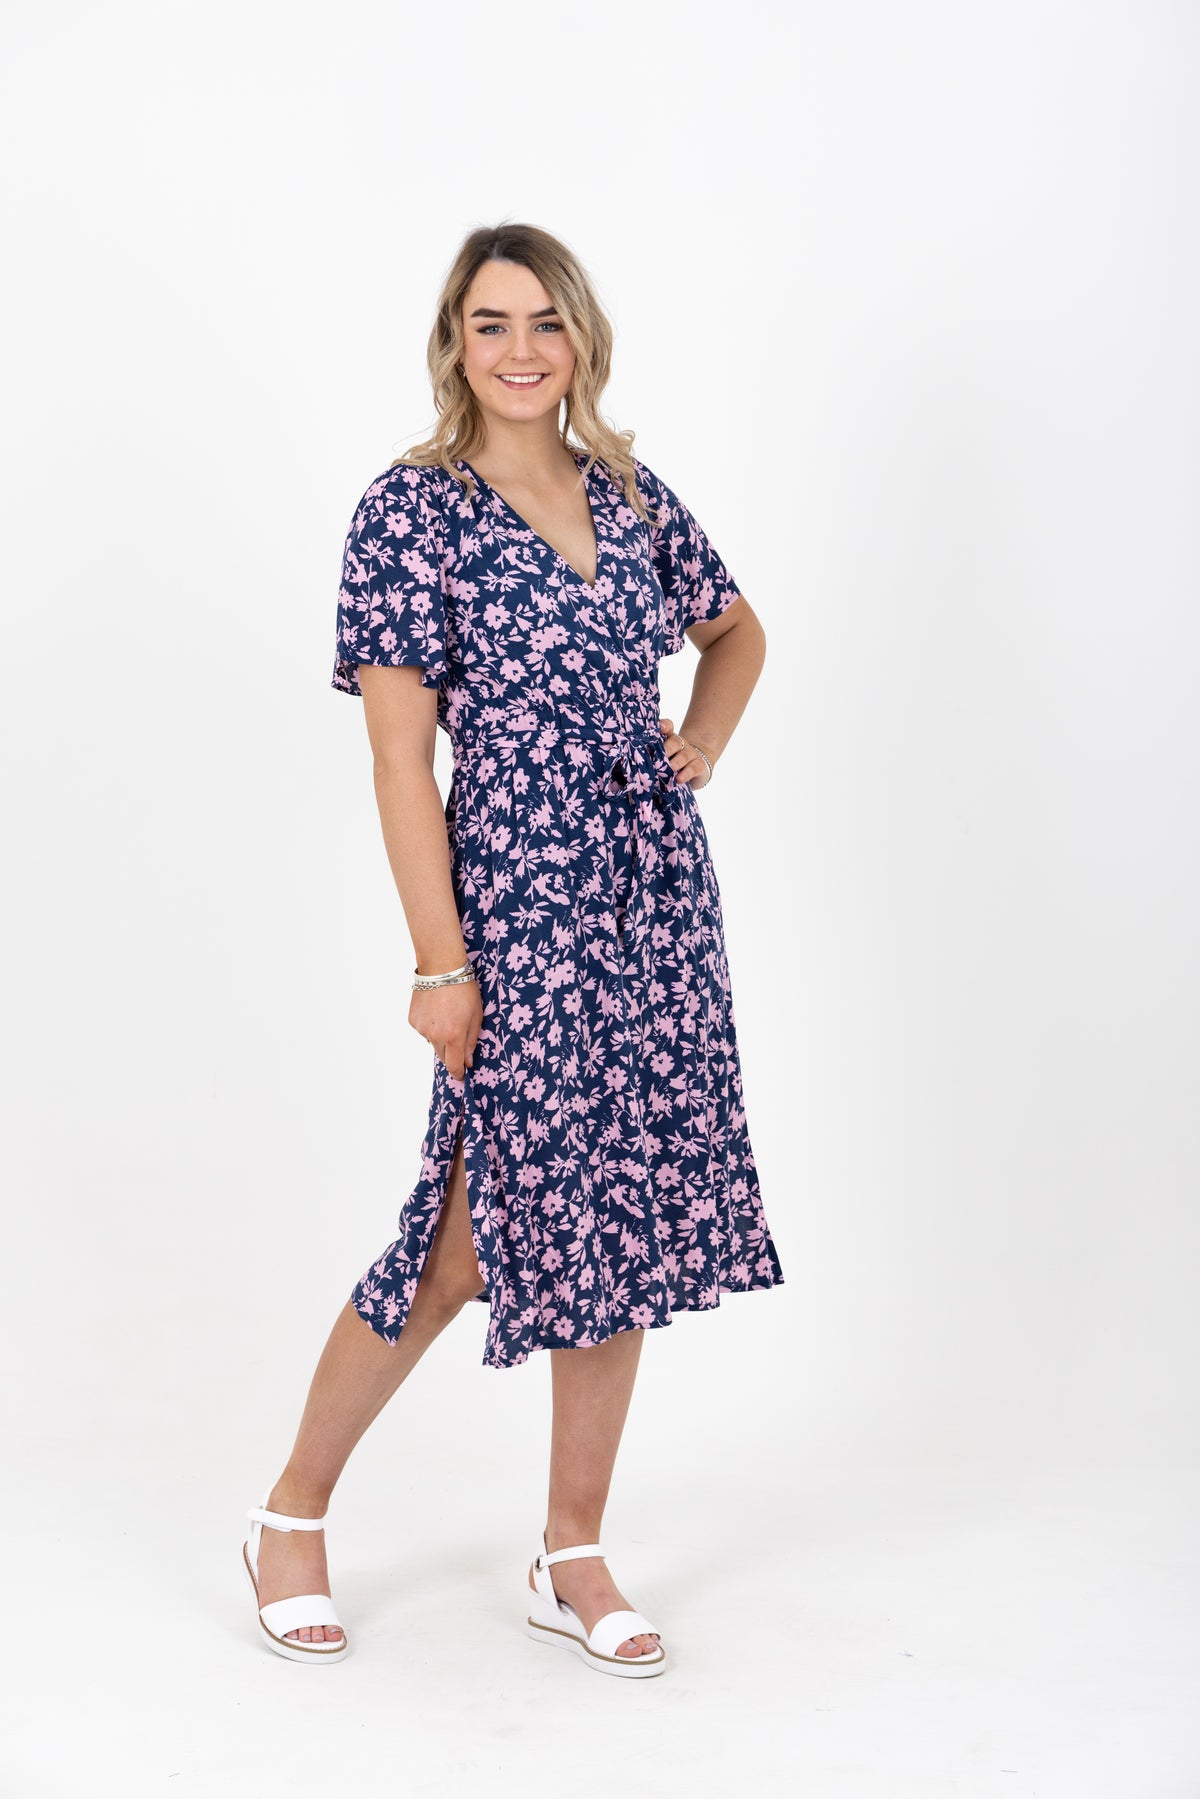 Positive Dress Navy Floral - EXCLUSIVE TO MINT